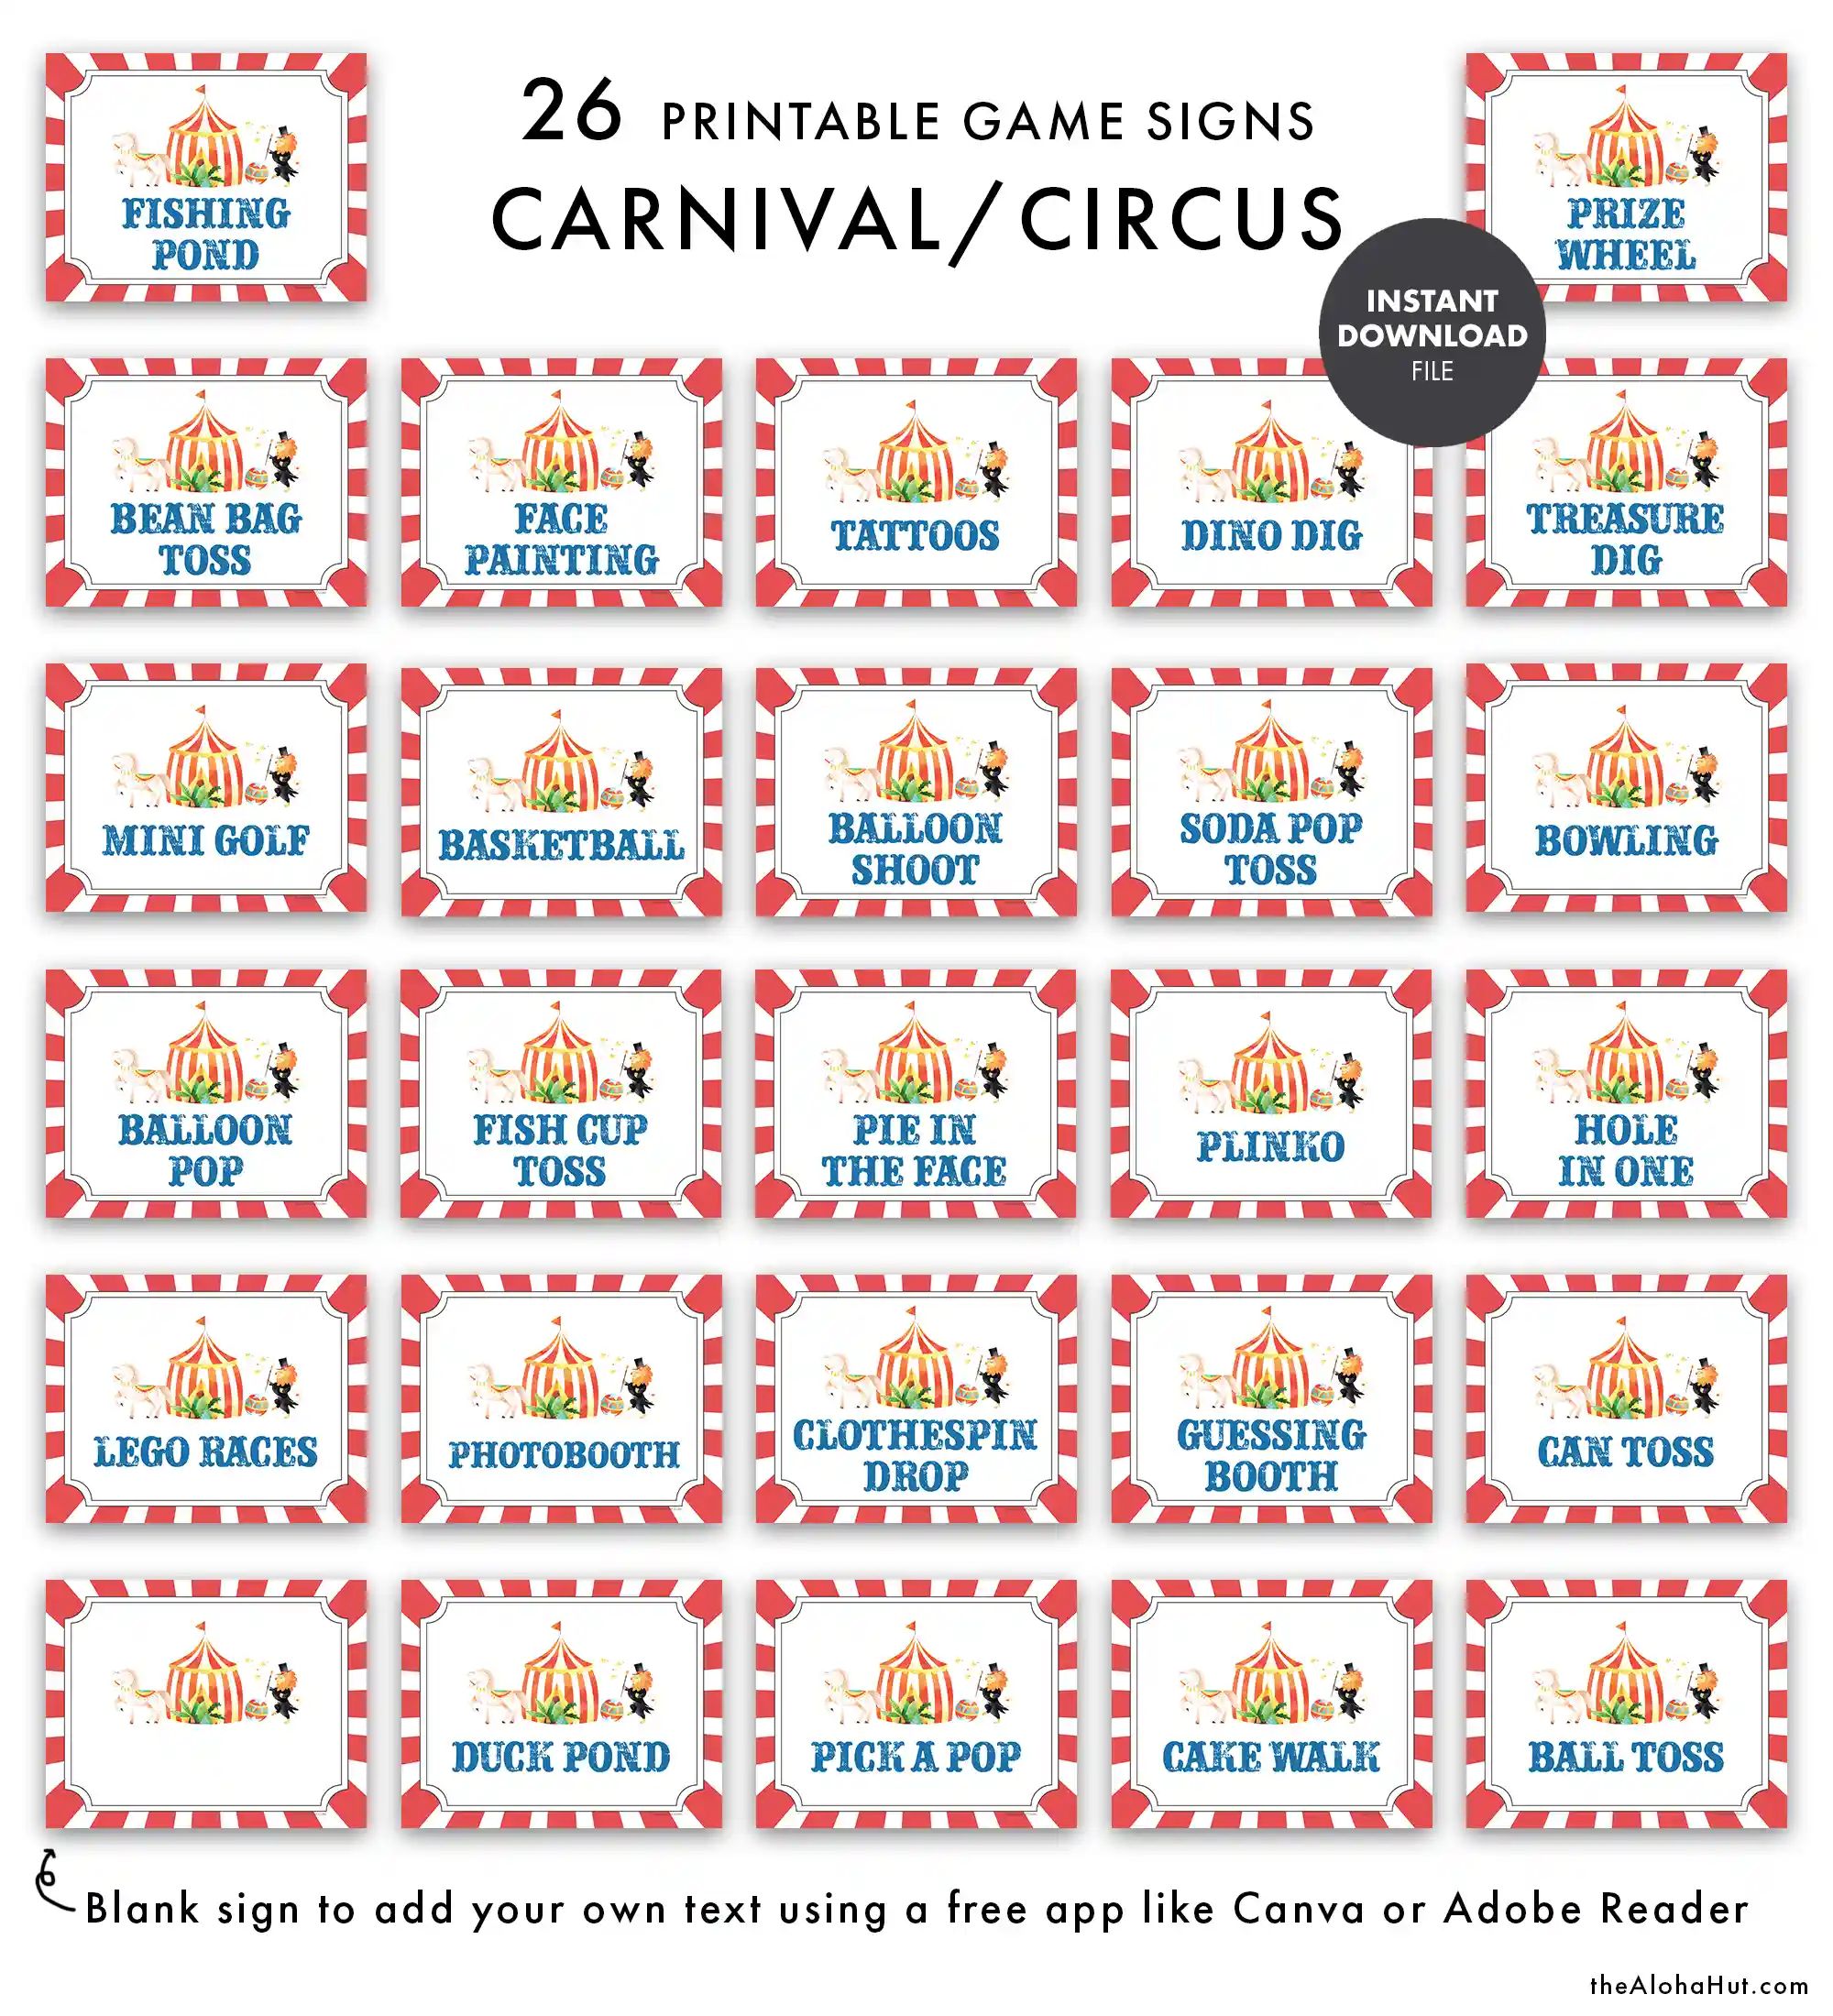 Carnival Party Ideas - Carnival Party Game Signs